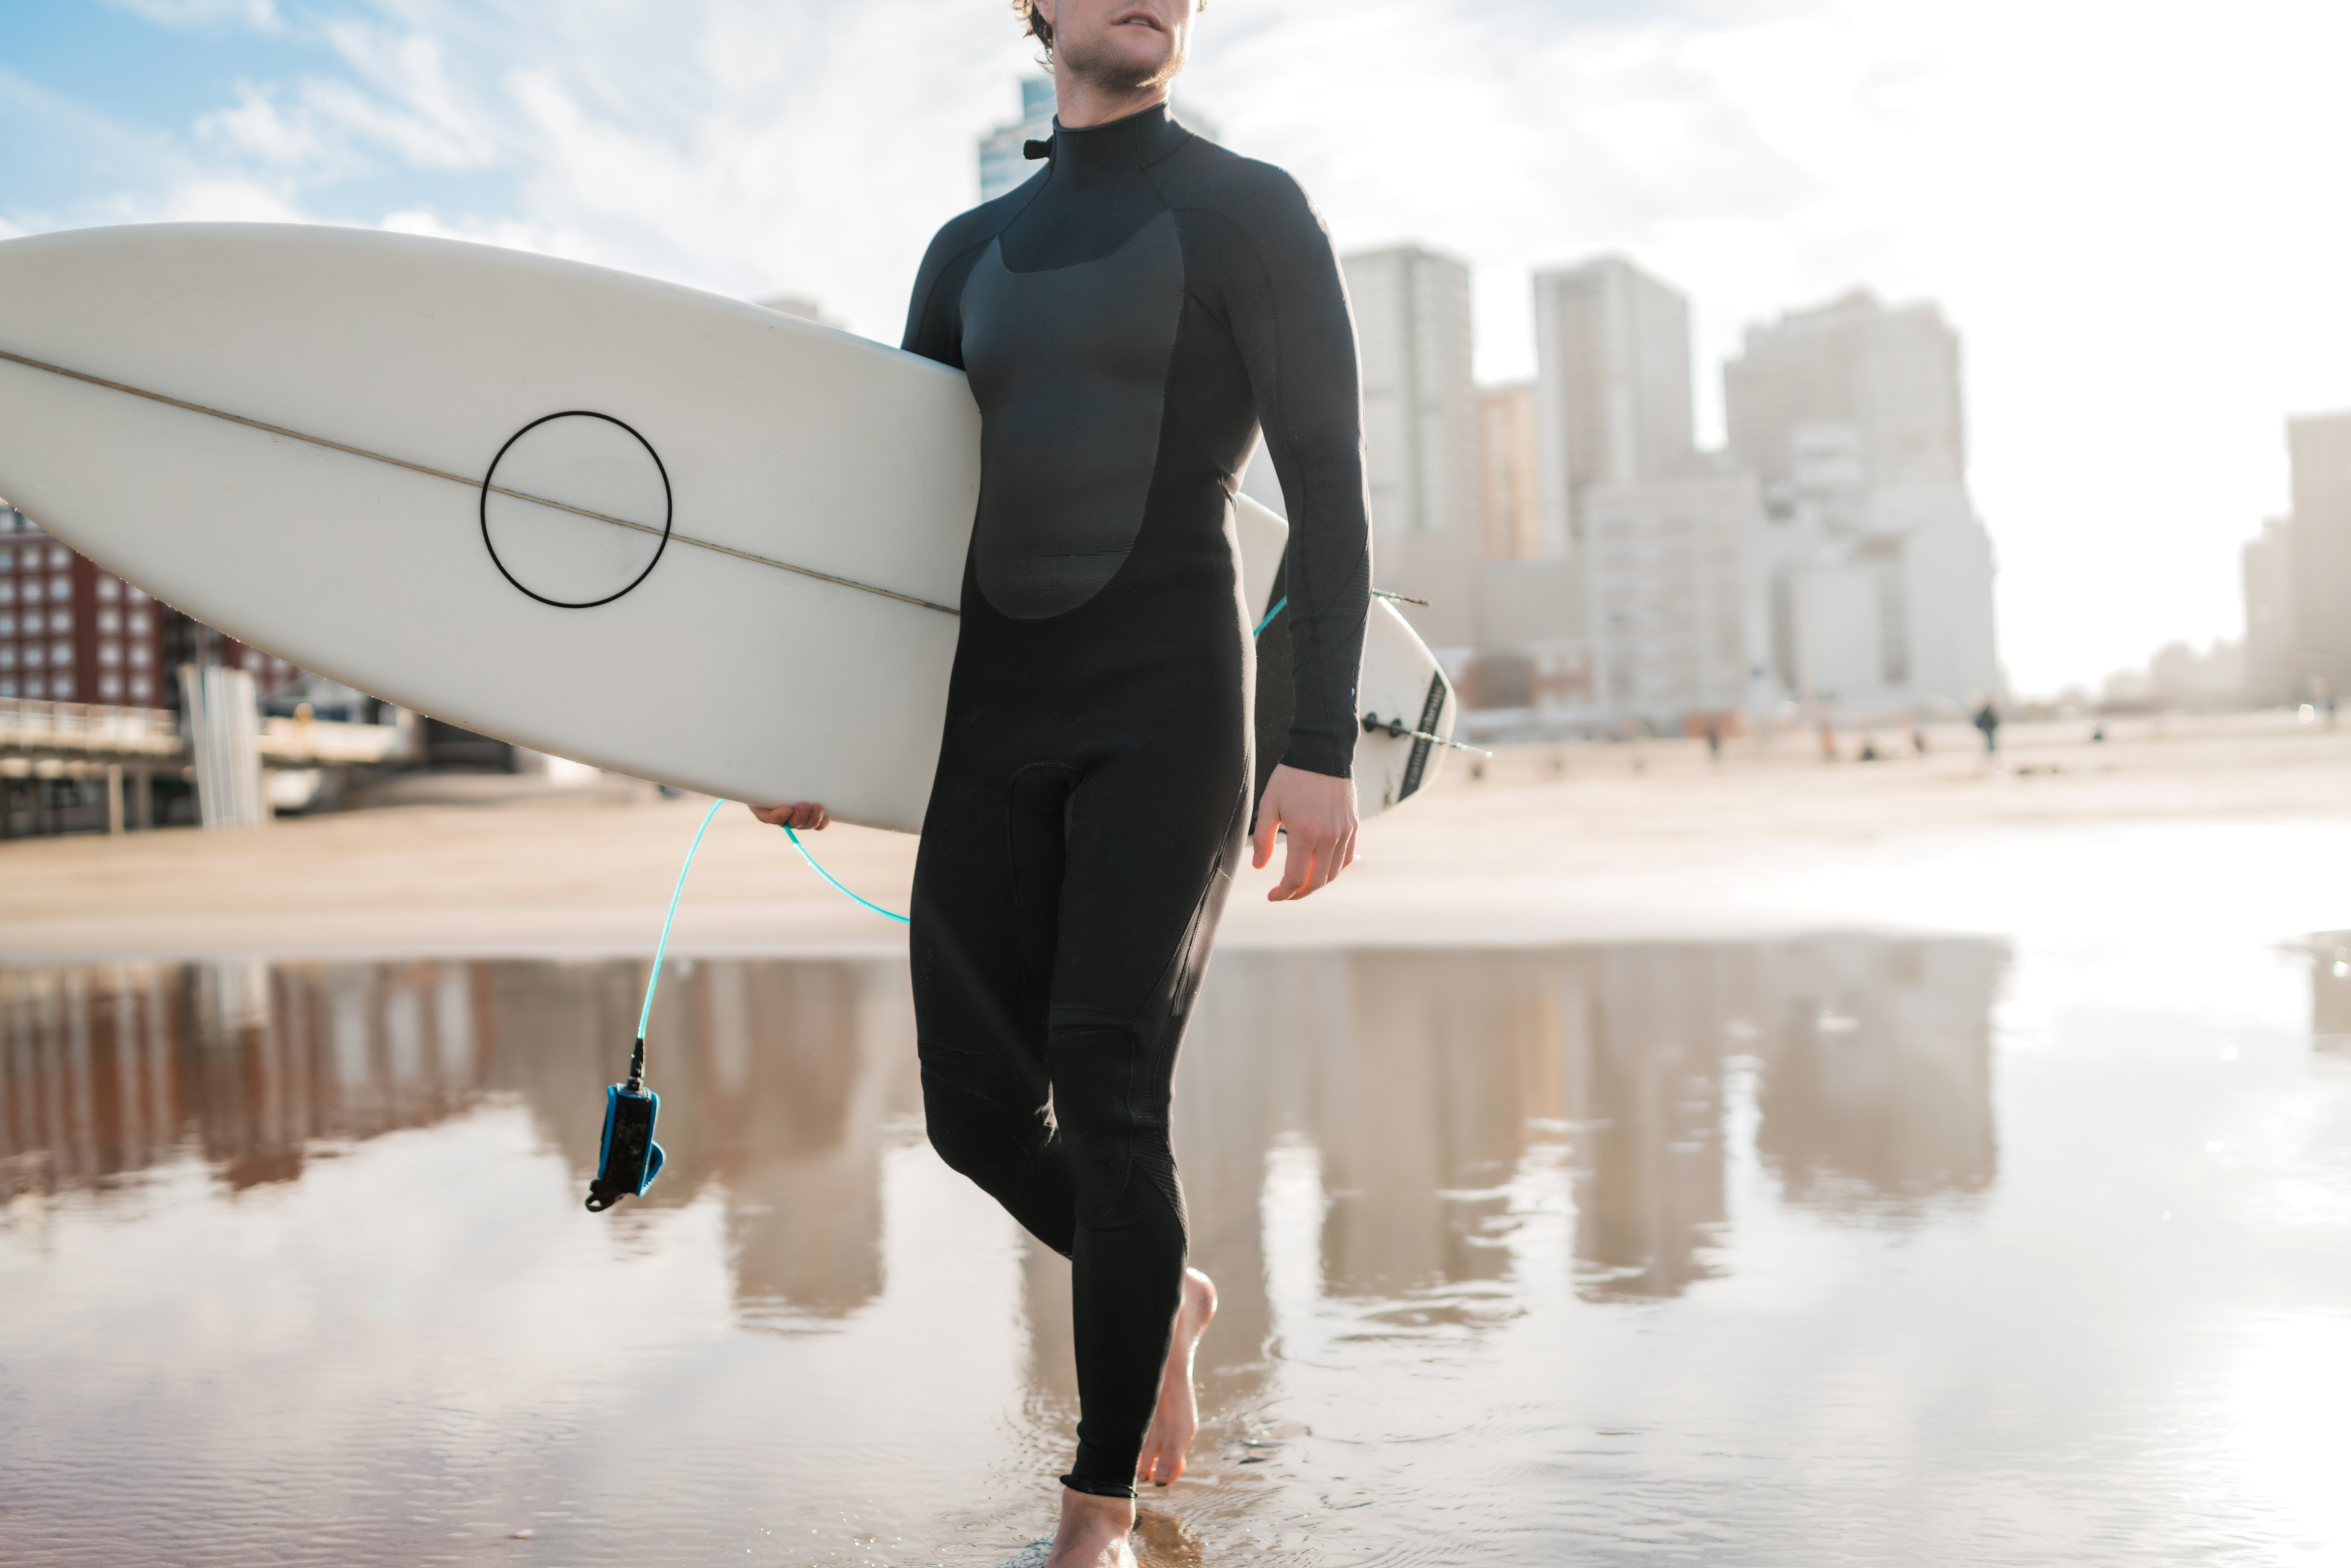 Surfer in Wetsuit